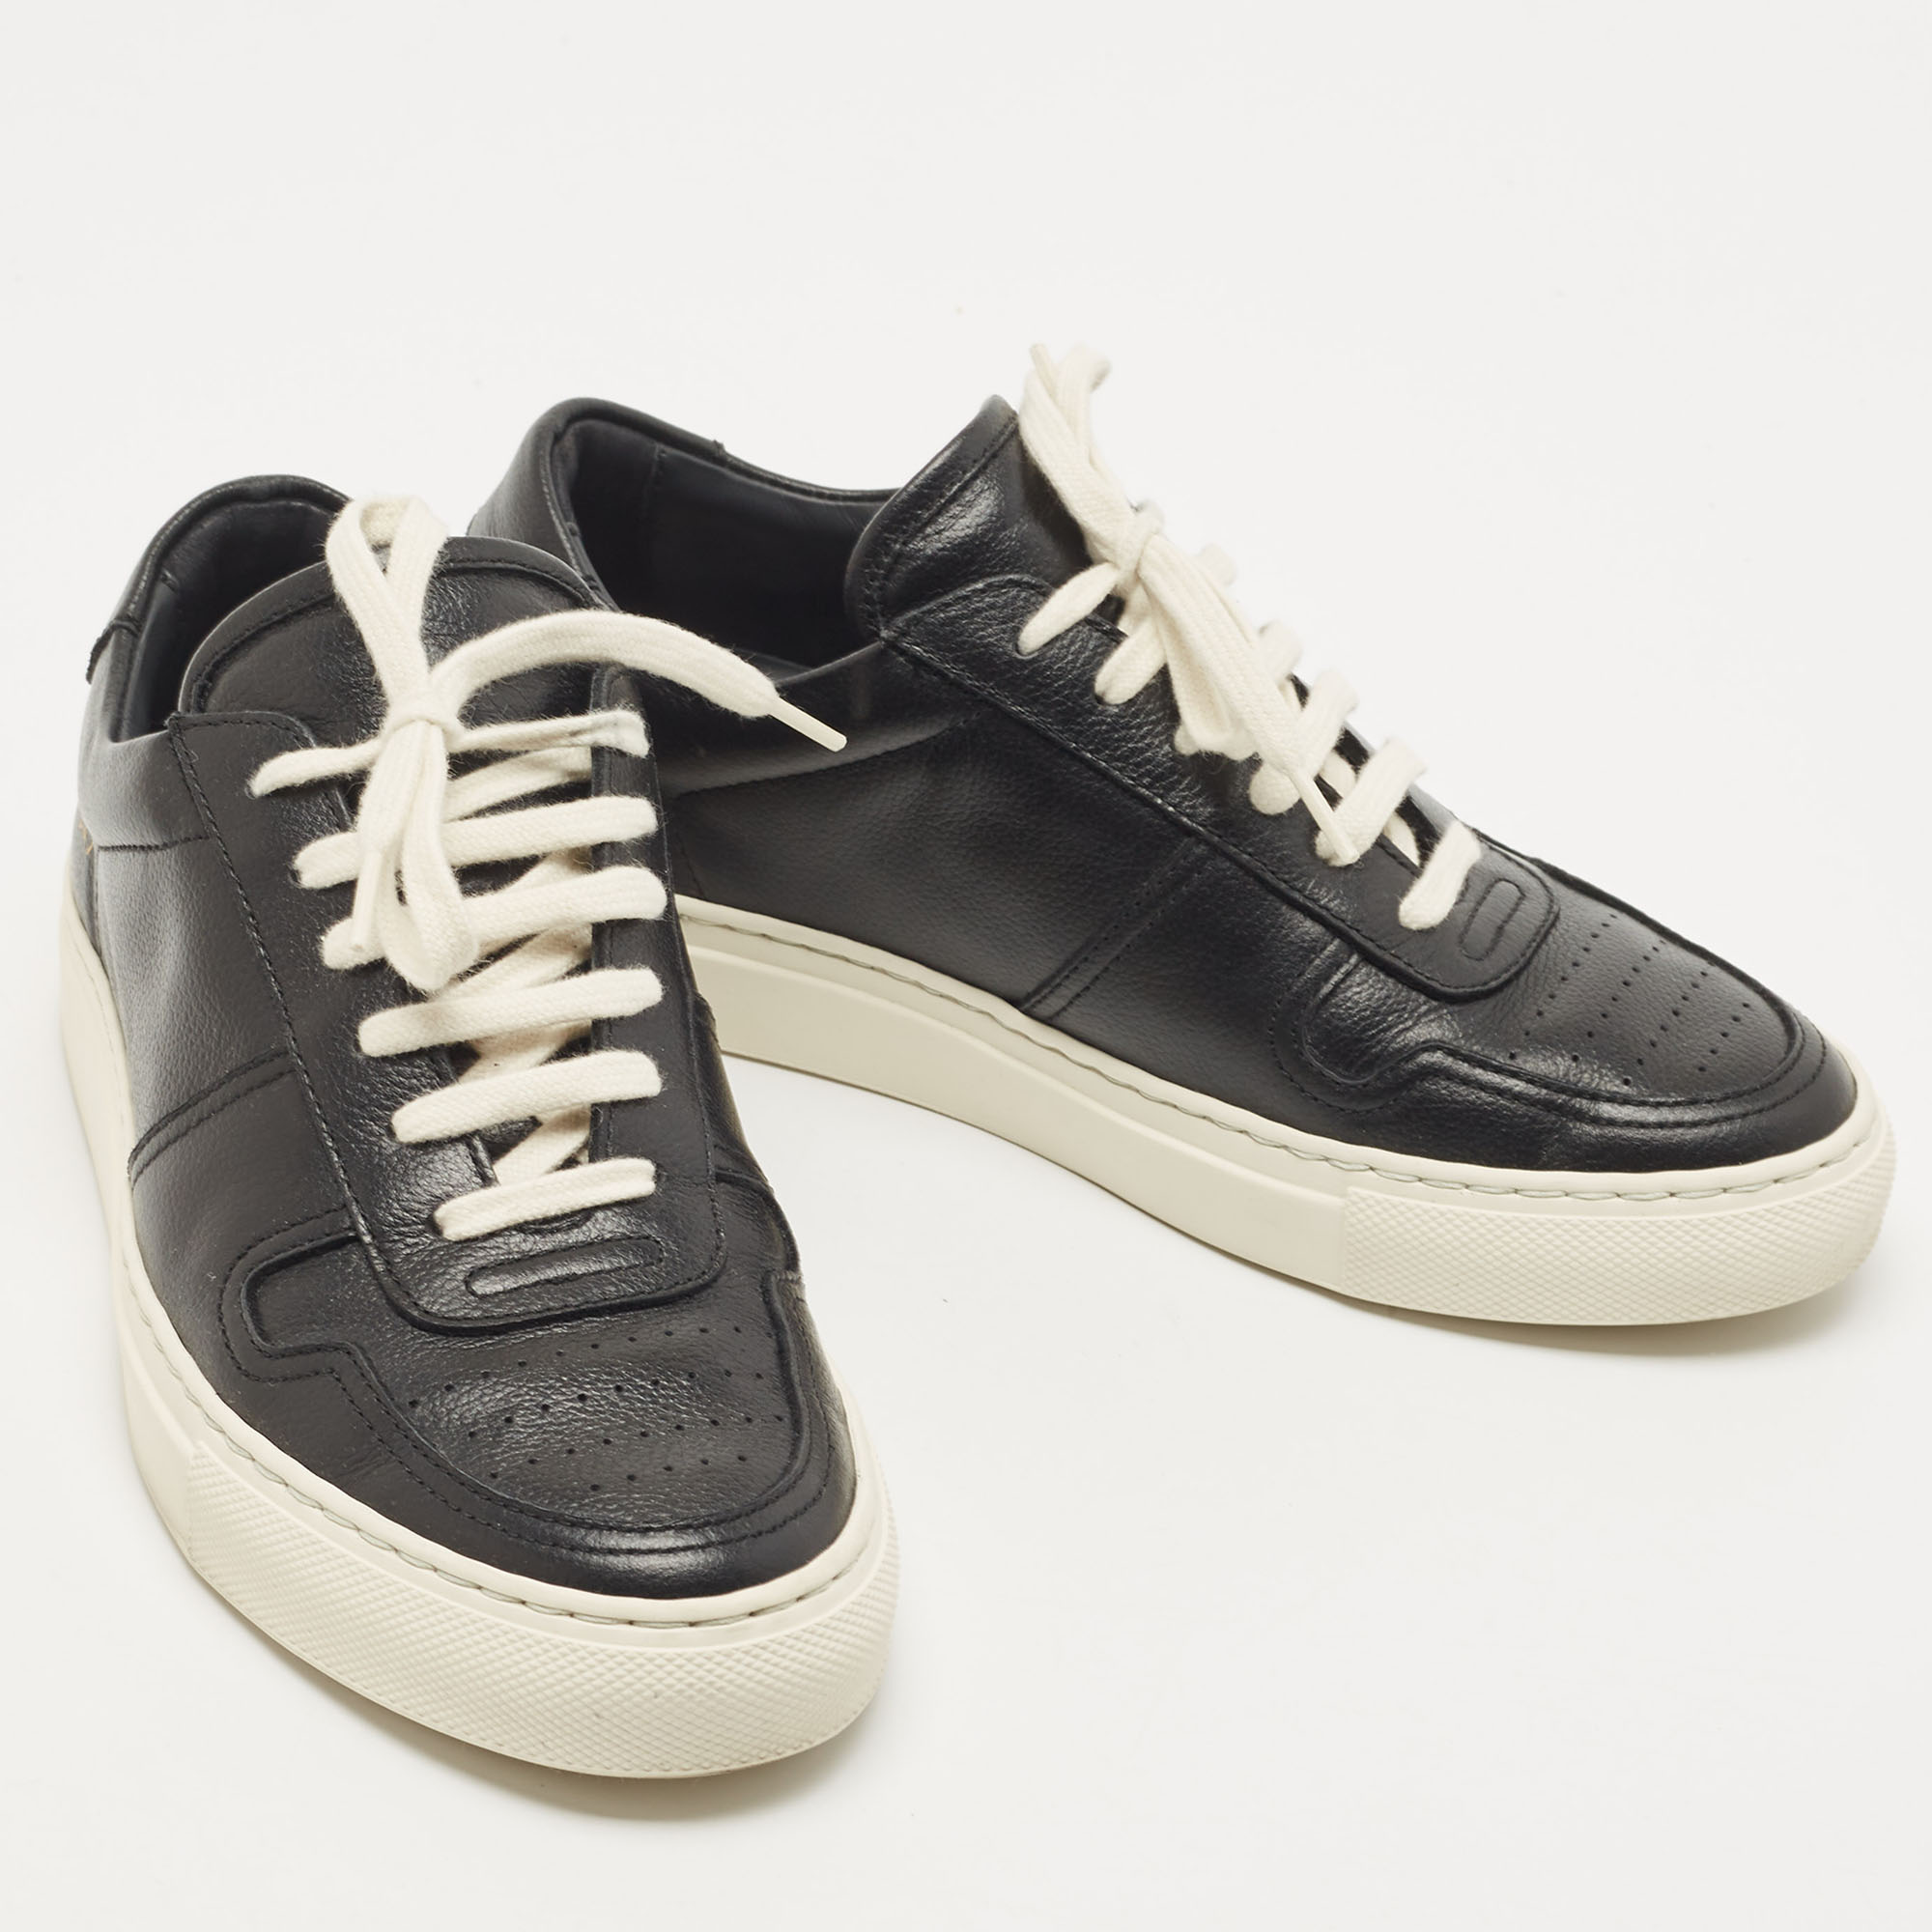 Common Projects Black Leather Bumby Low Top Sneakers Size 35